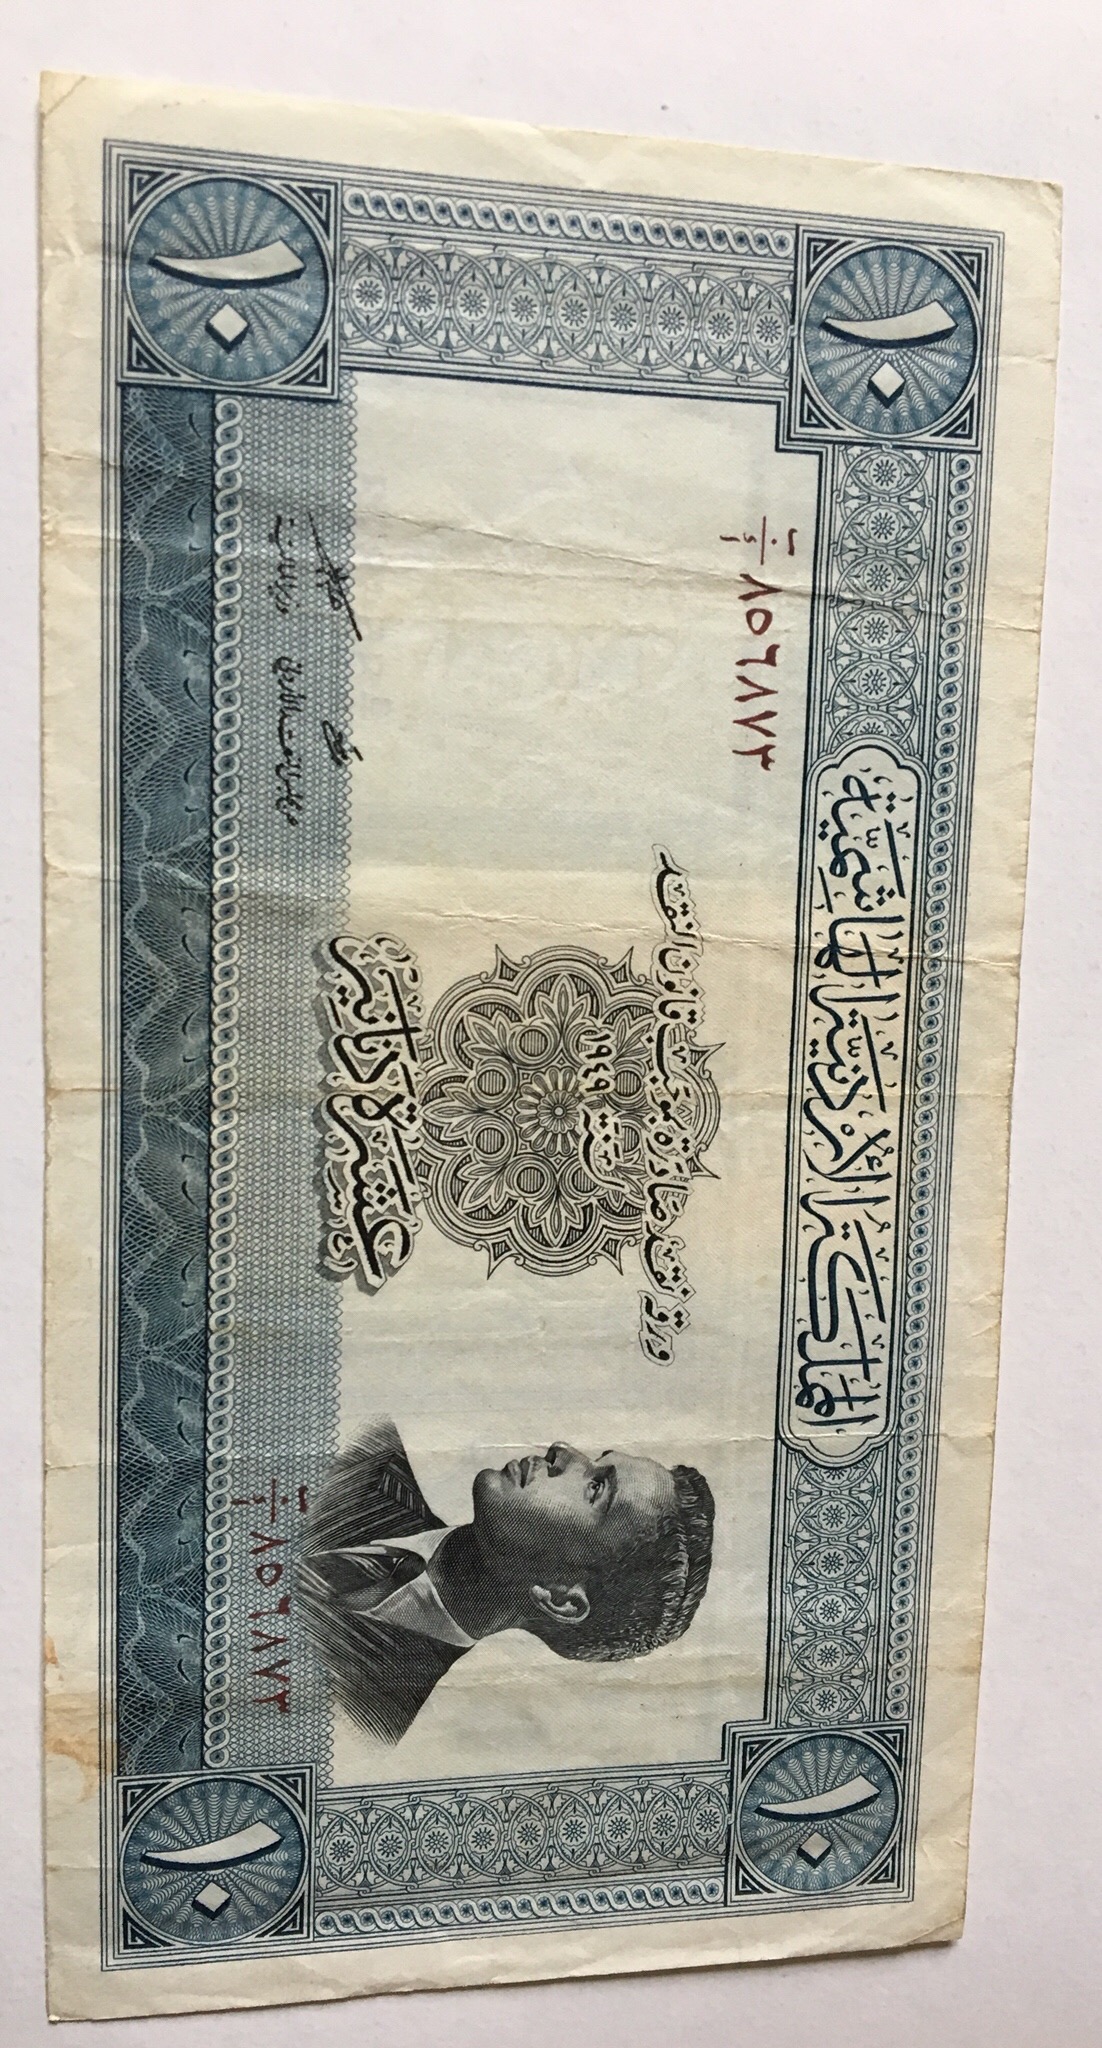 1952 Law 1949 Jordan 10 Dinars Banknote Pick # 8 King Hussein Young 2nd Issue